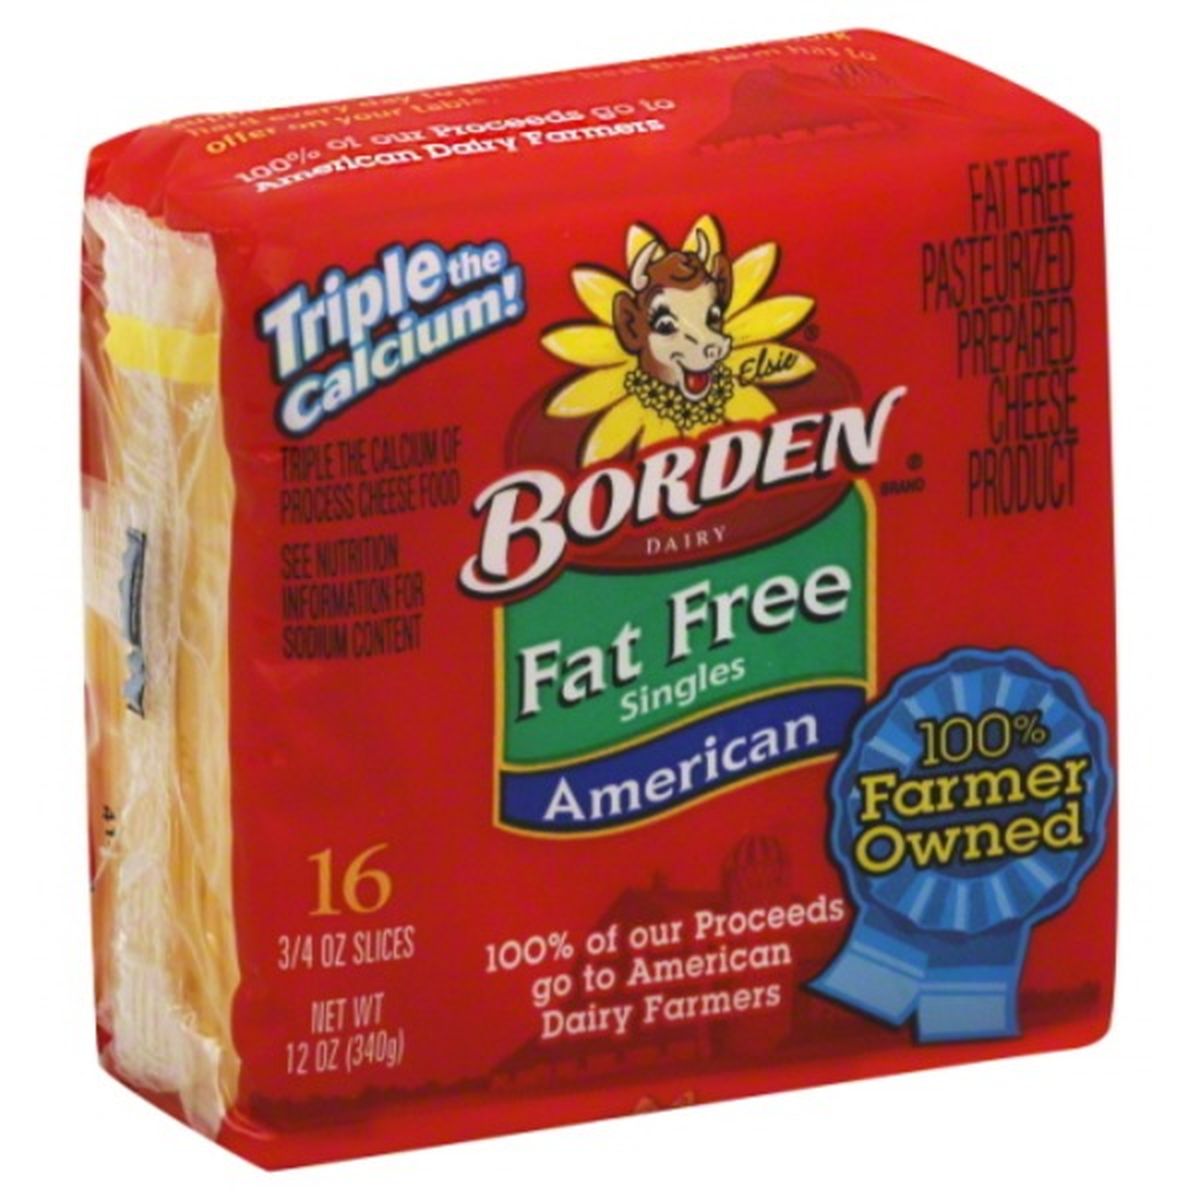 Calories in Borden Singles Cheese Product, Pasteurized Prepared, American, Fat Free